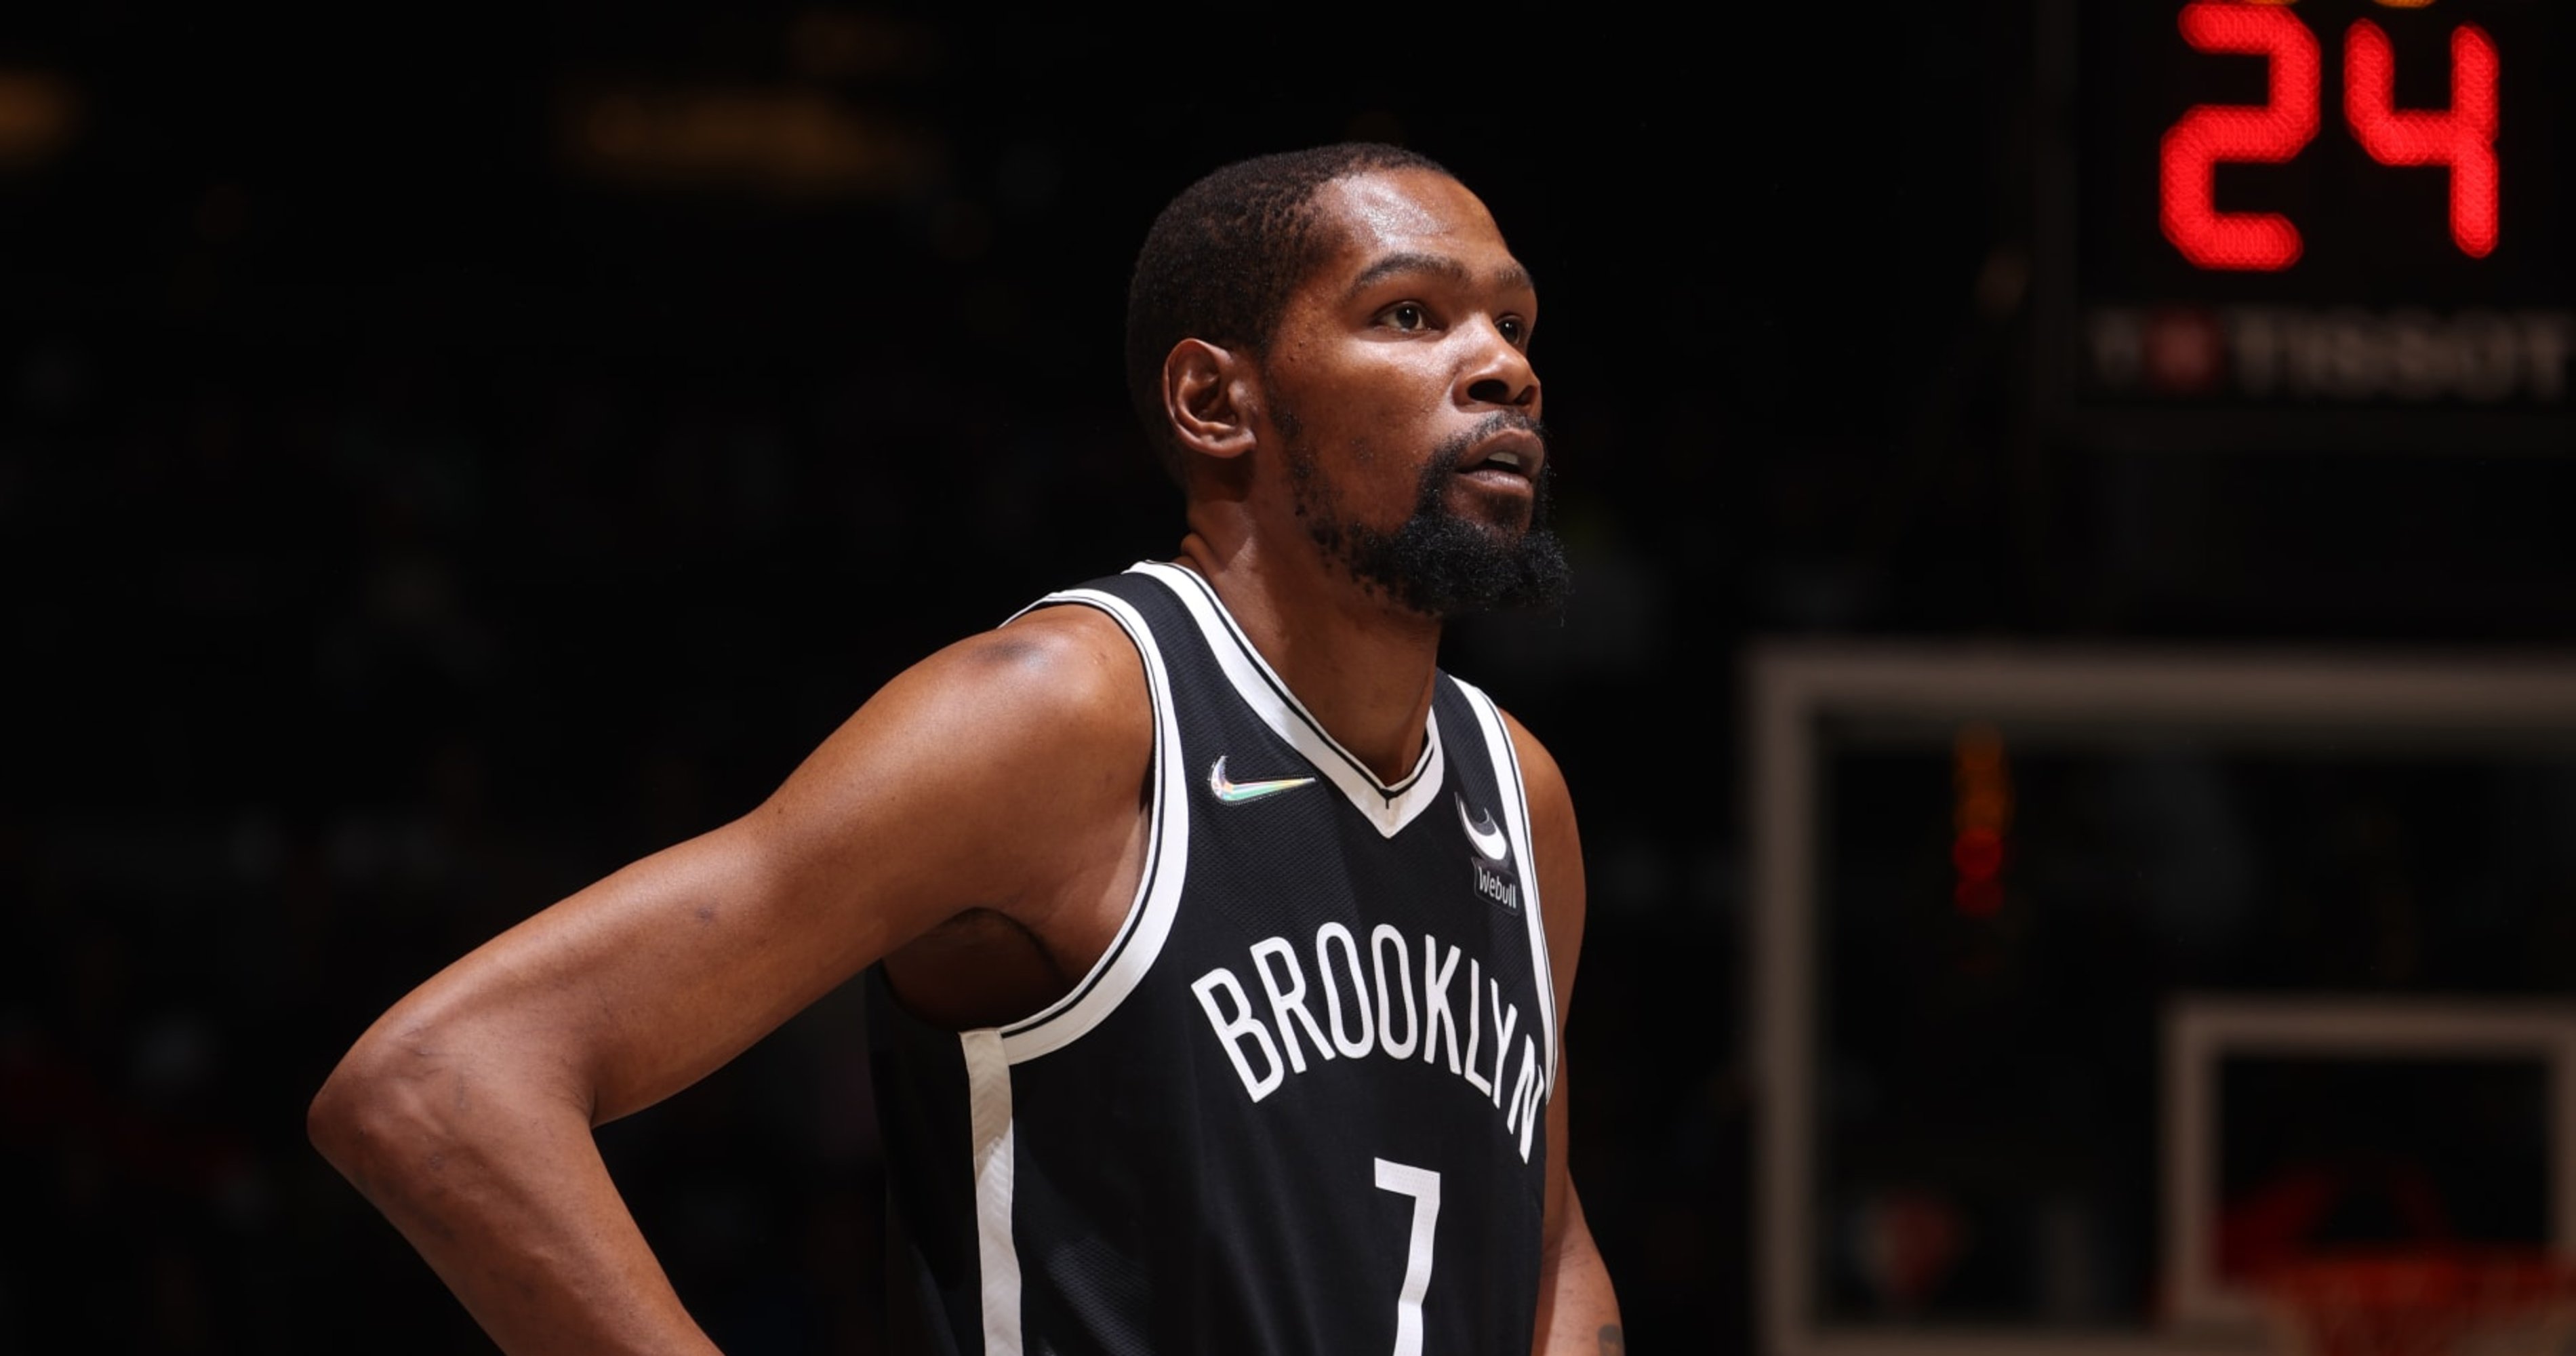 Brooklyn Nets land $30 million per year jersey deal with Webull